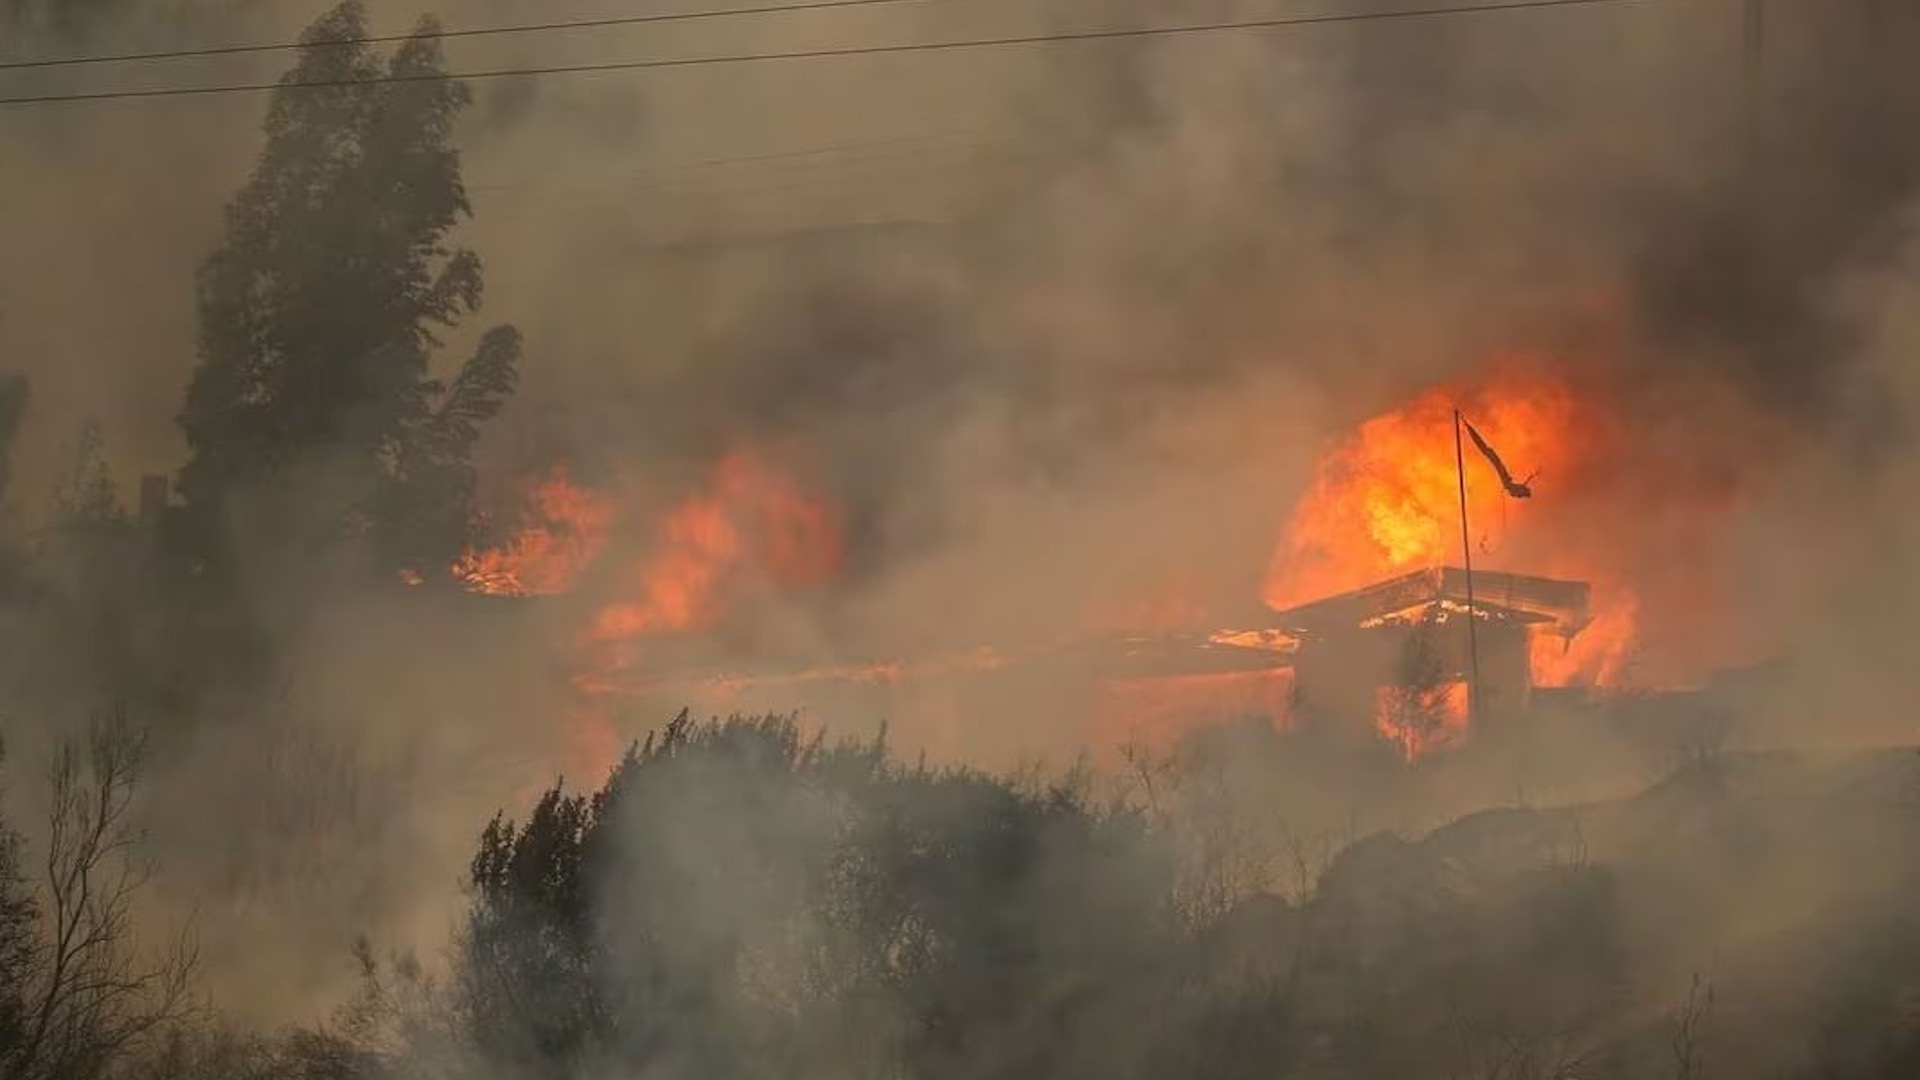 Chile's forest fires claim 64 lives, threaten urban areas